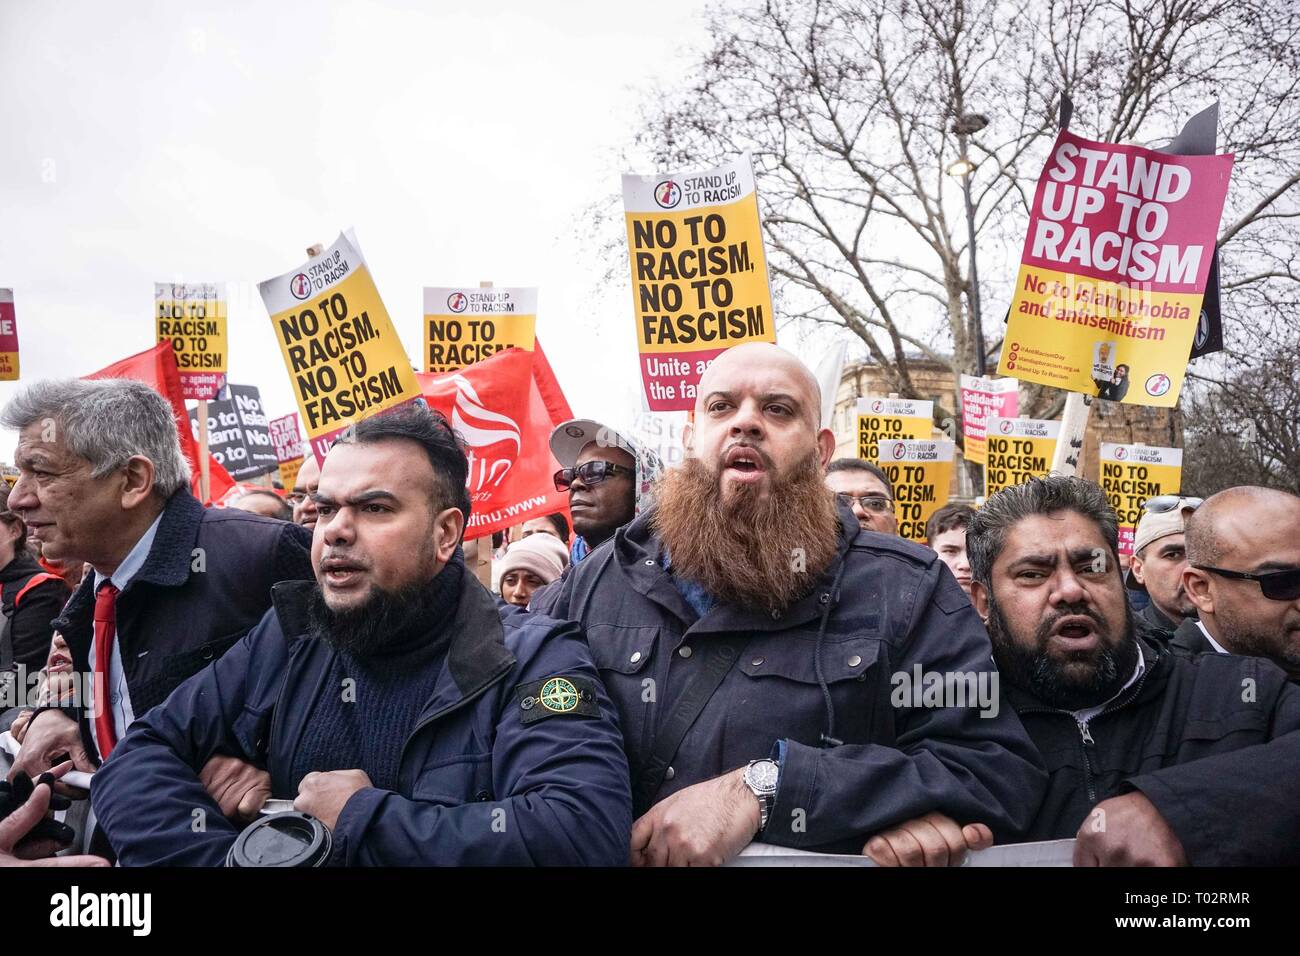 London, UK. 16th March 2019. Protesters are seen shouting slogans while holding placards during an anti racist demonstration. Thousands of anti-racists groups took to the streets marking the World against Racism global day of action. Credit: SOPA Images Limited/Alamy Live News Stock Photo